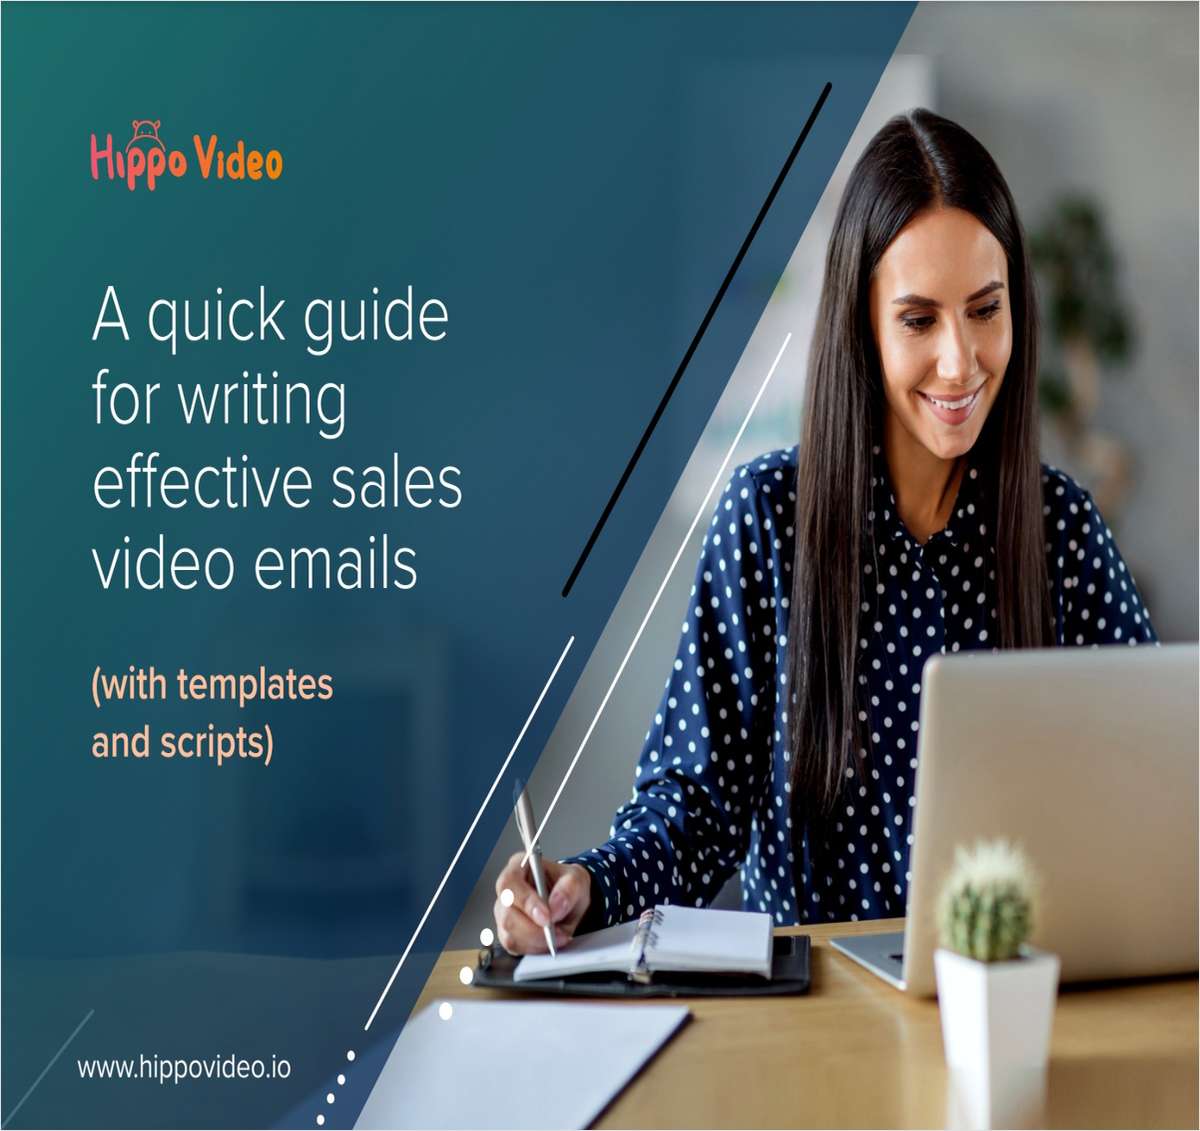 15 Proven Video Scripts and Email Templates